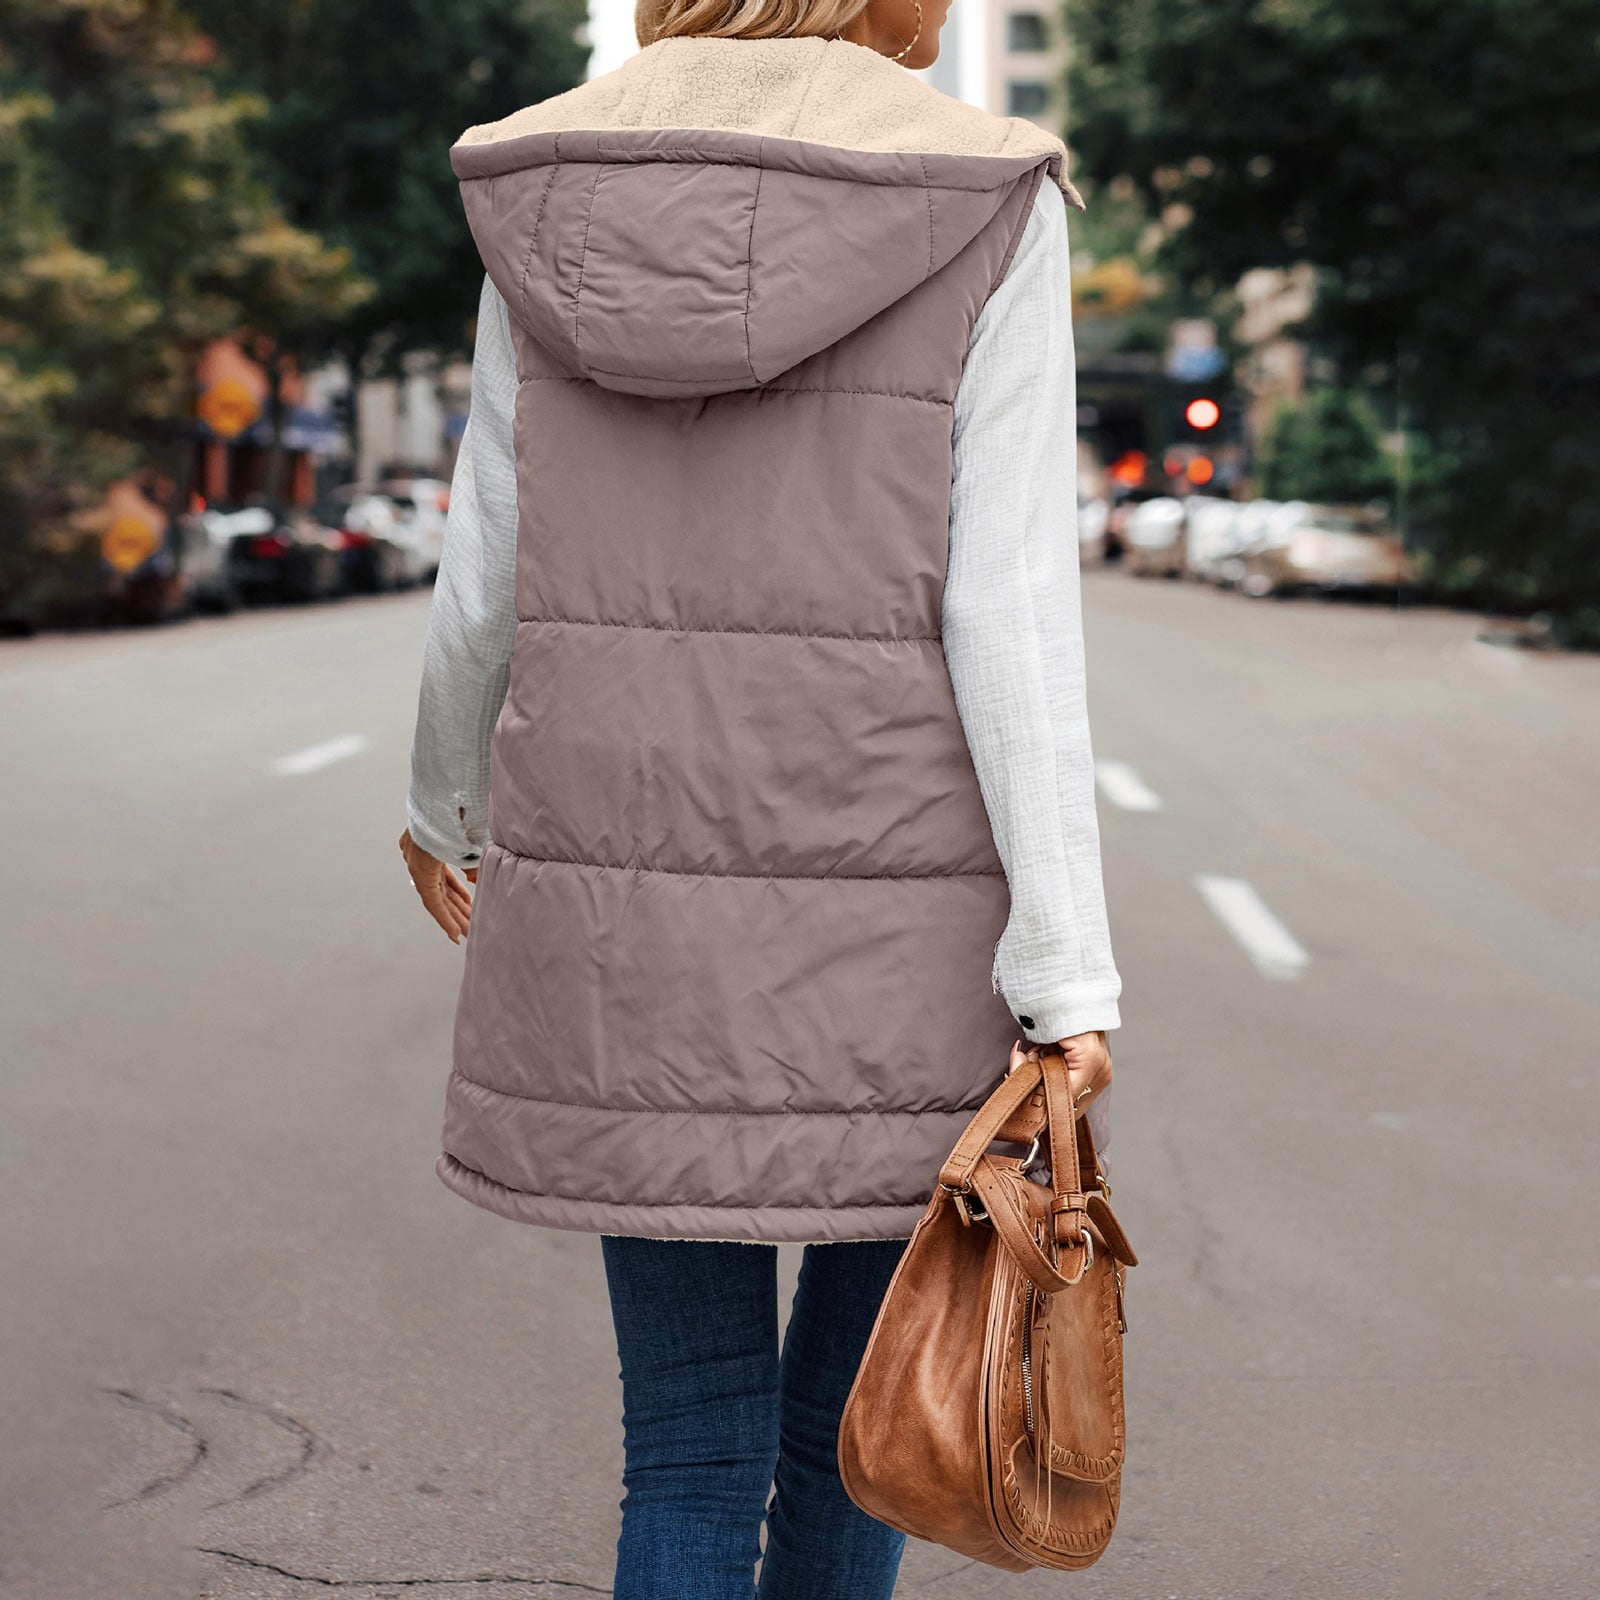 TQWQT Women's Long Quilted Vest Hooded Maxi Length Sleeveless